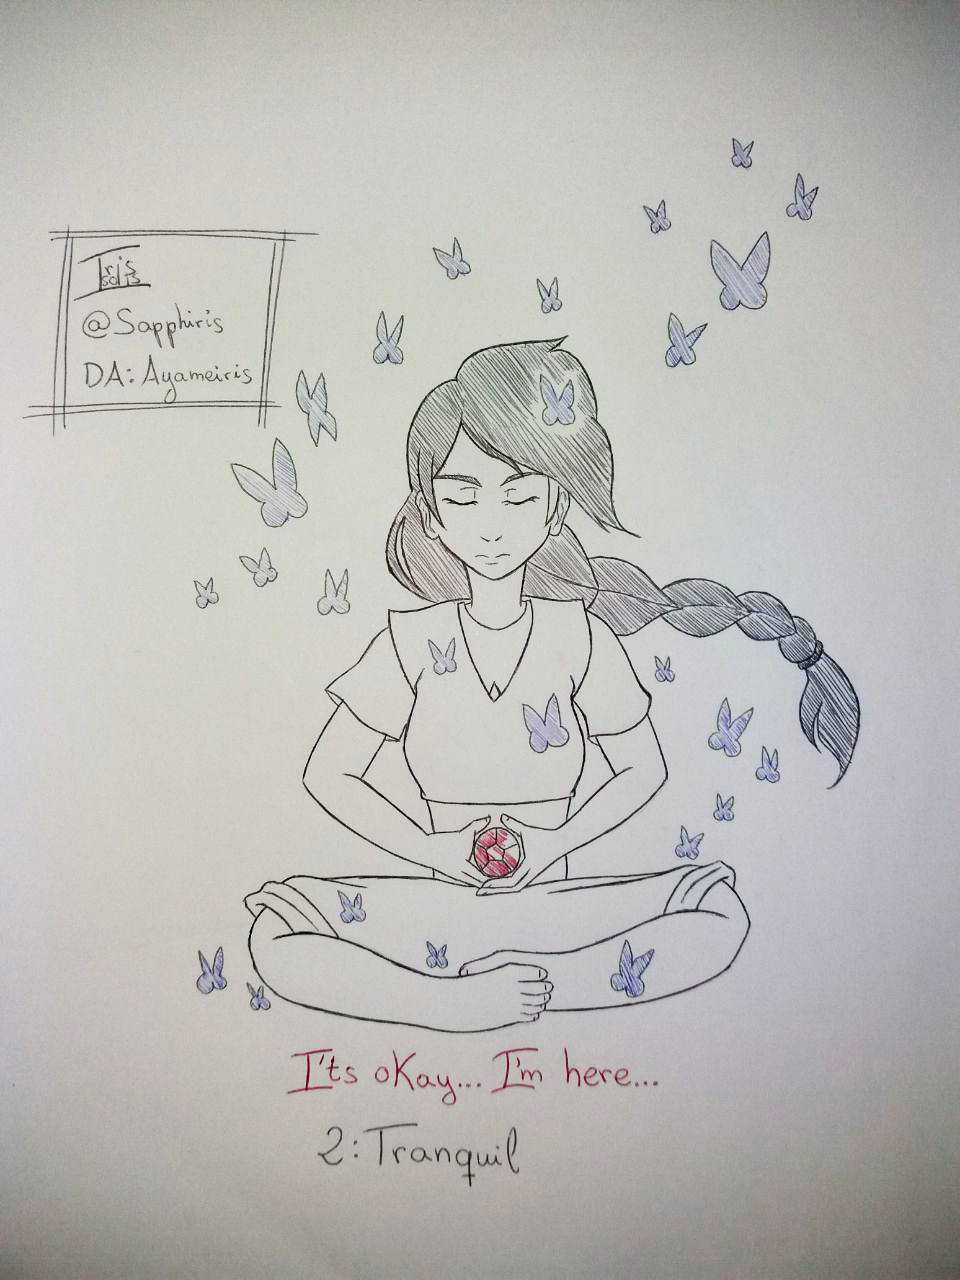 [Imagen: inktober_2018___2_tranquil_by_ayameiris-dcodc3a.png]